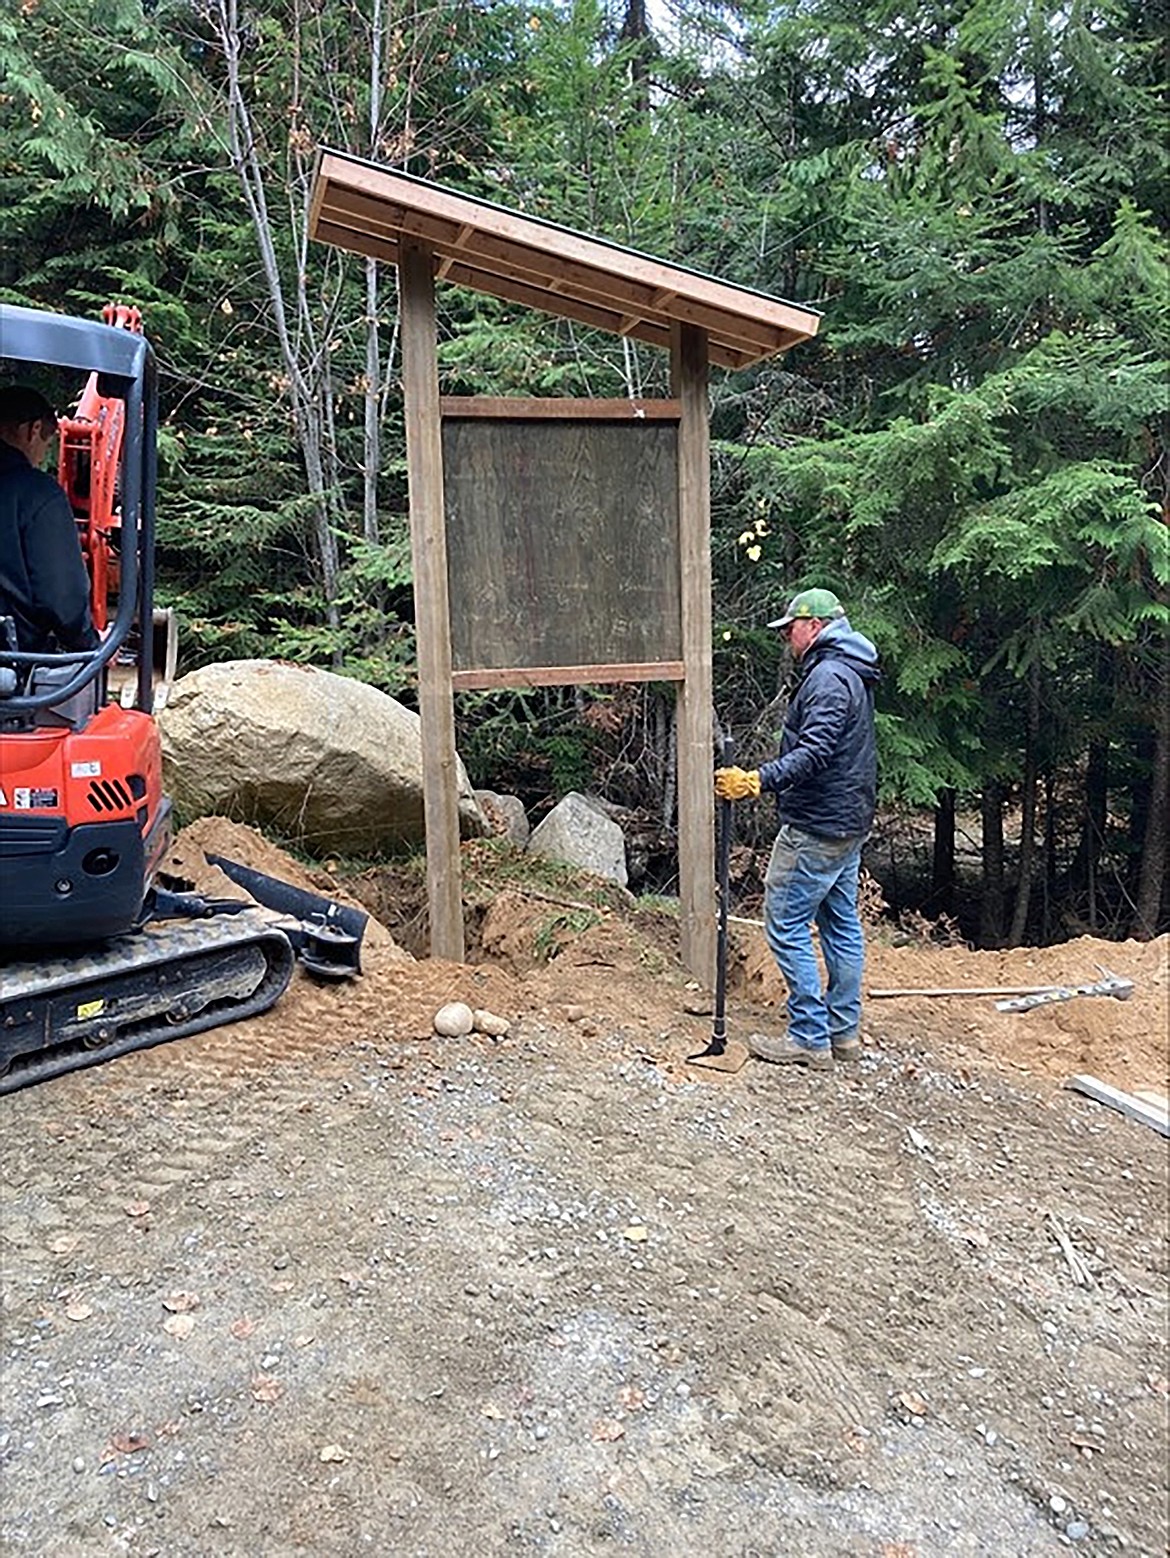 Sean Hanley, IDPR trail cat operator, is pictured during installation of the kiosk at Falls Creek road gate on Stimsom land.